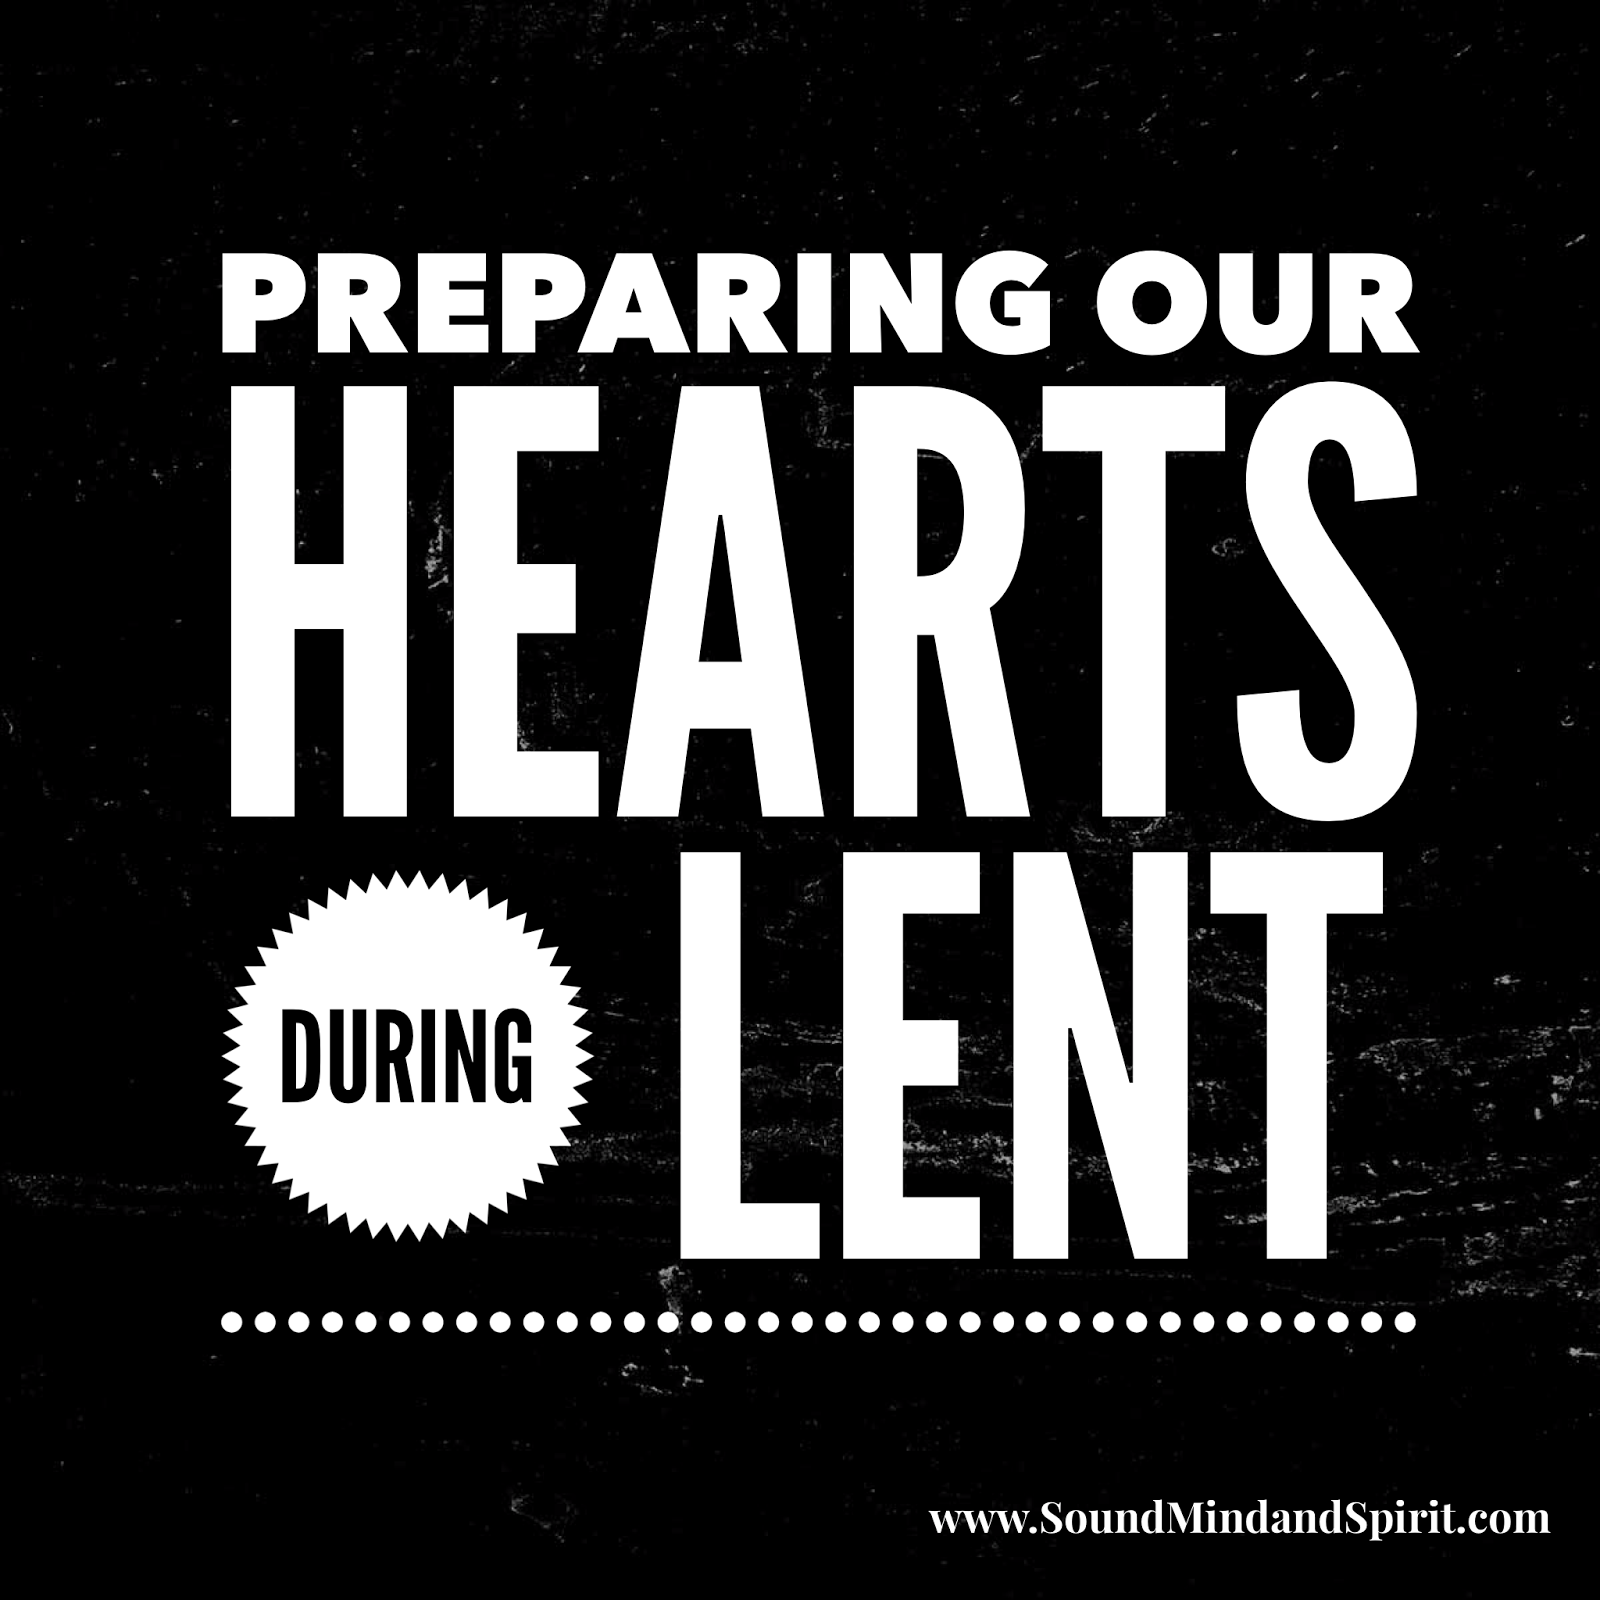 Preparing Our Hearts During Lent